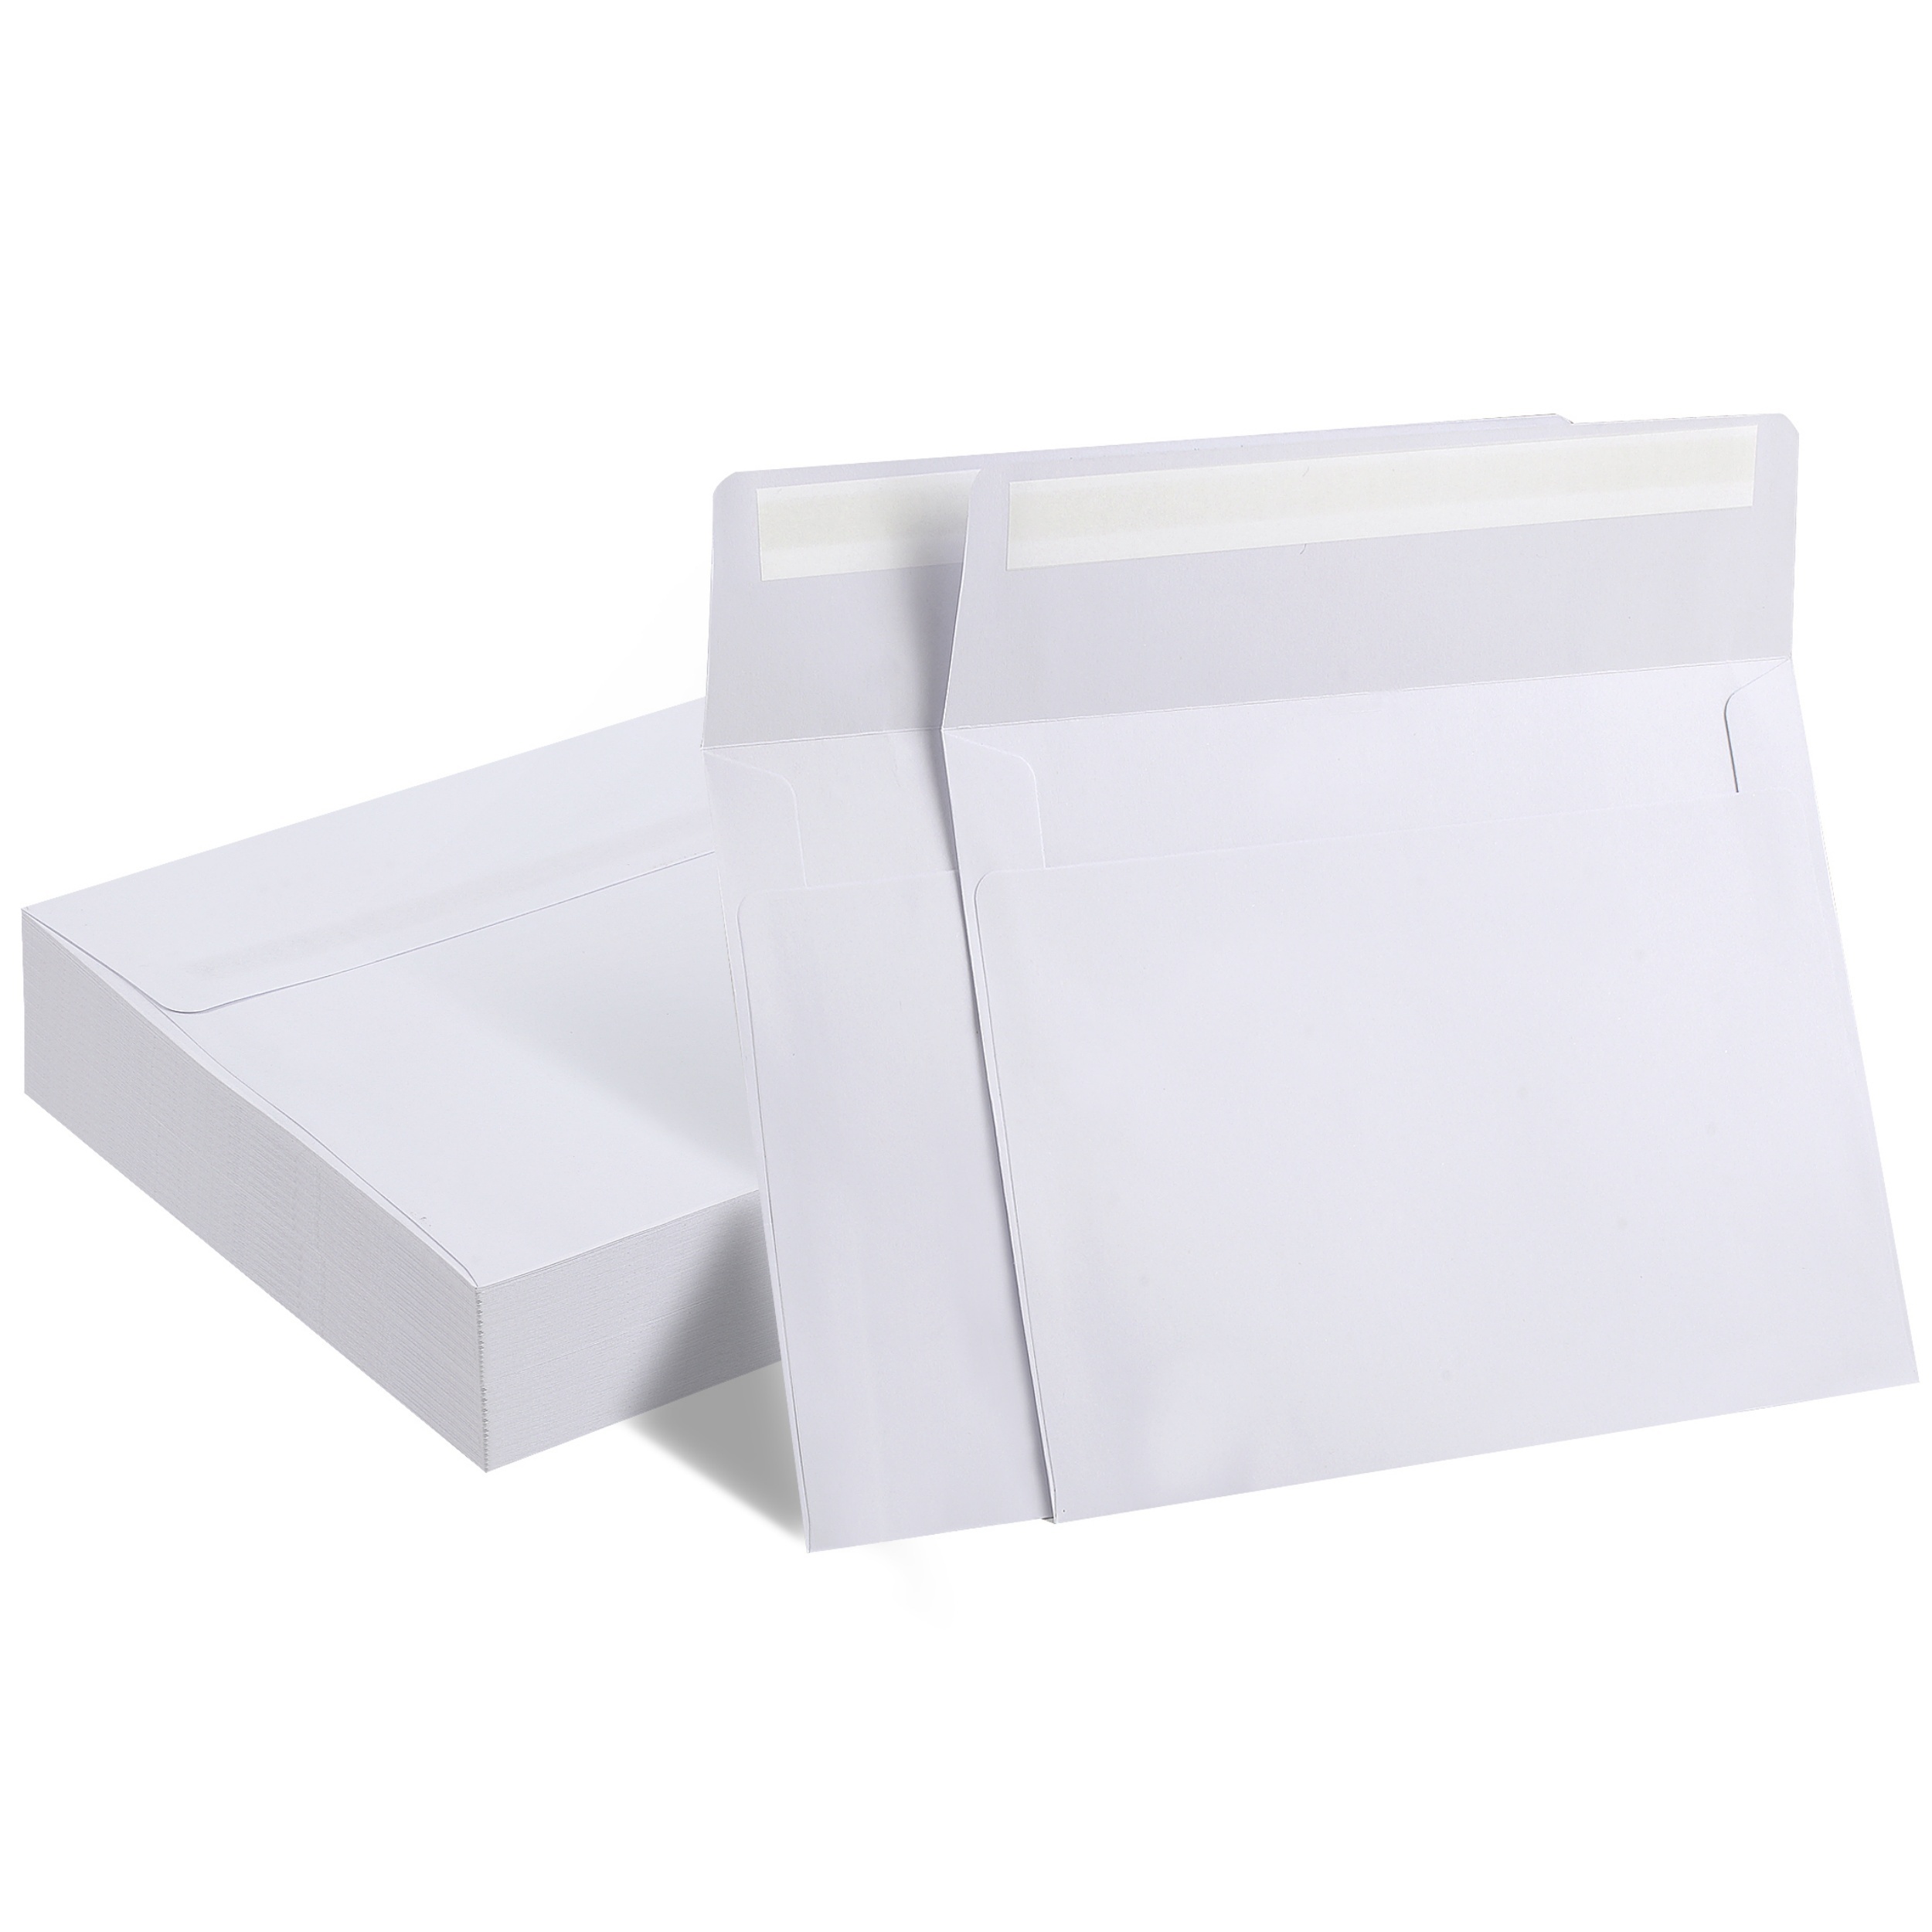 Joyberg 50 Packs 5x7 Envelopes, White A7 Envelopes for Invitations,  Printable, Self Seal for Weddings, Invitations, Photos, Postcards, Greeting  Cards